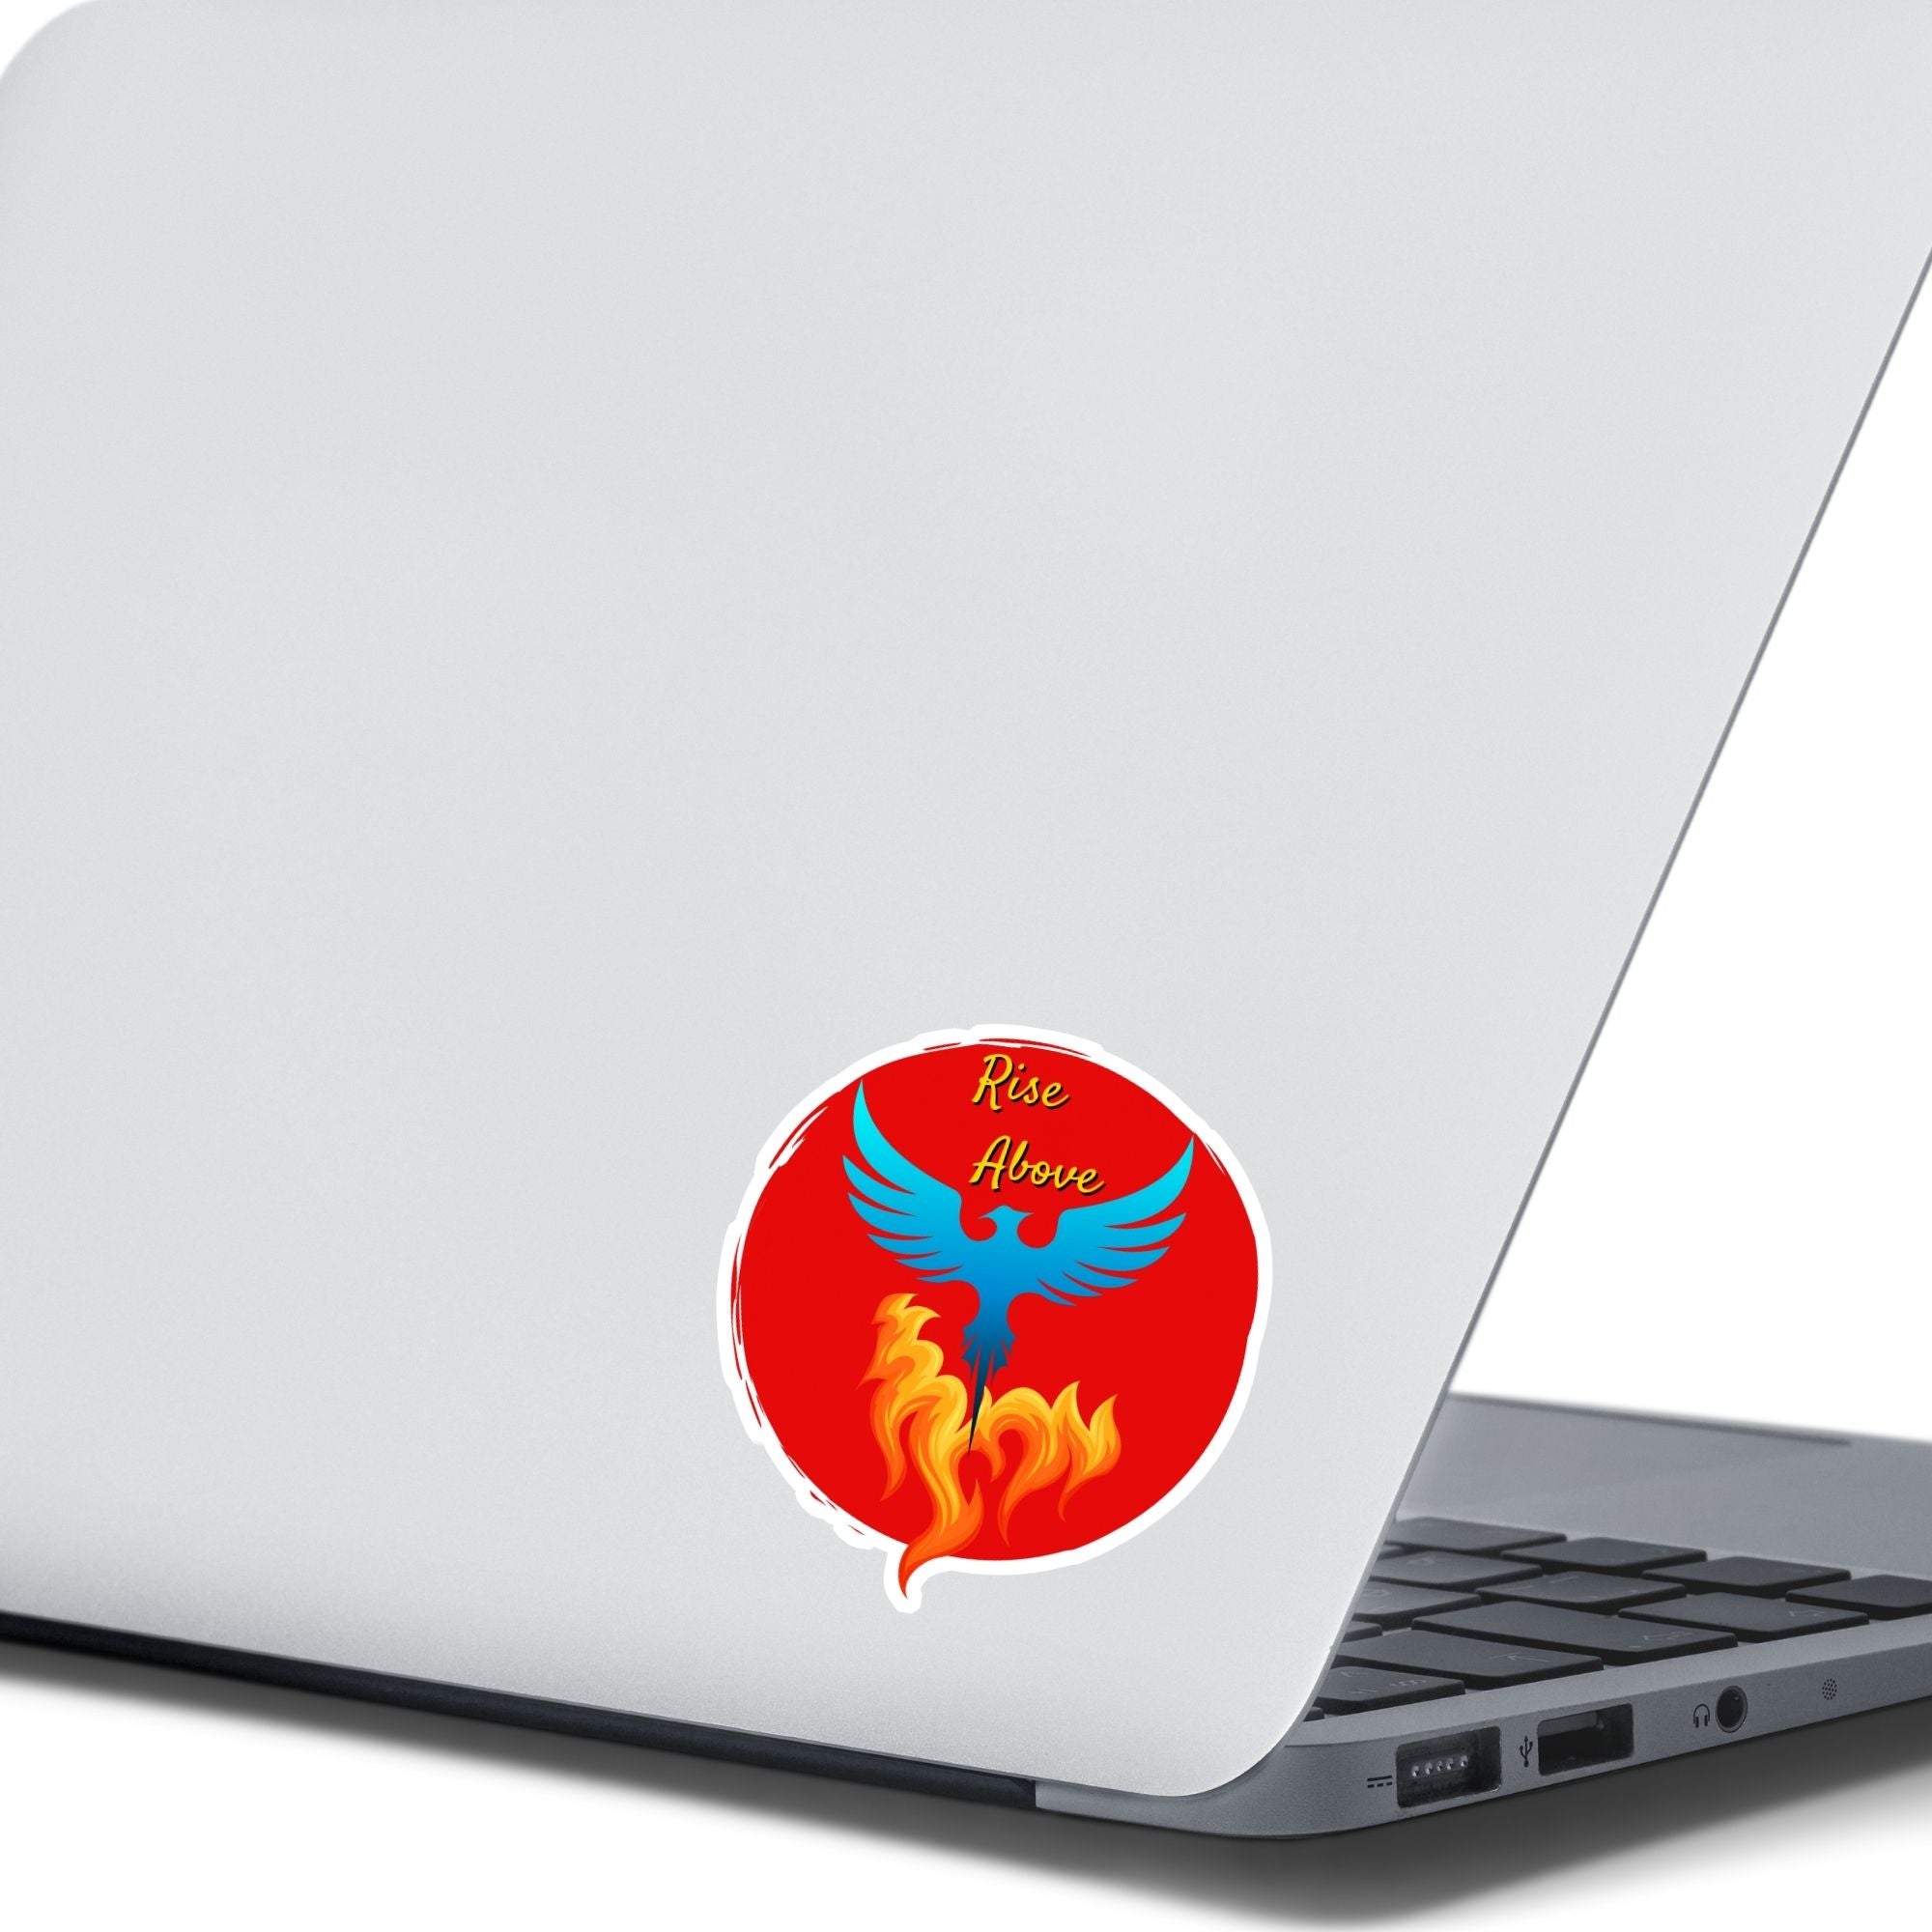 Phoenix rising - this individual die-cut sticker features a blue phoenix rising out of flames with the words "Rise Above" at the top, all on a red background. This image shows the Rise Above die-cut sticker on the back of an open laptop.